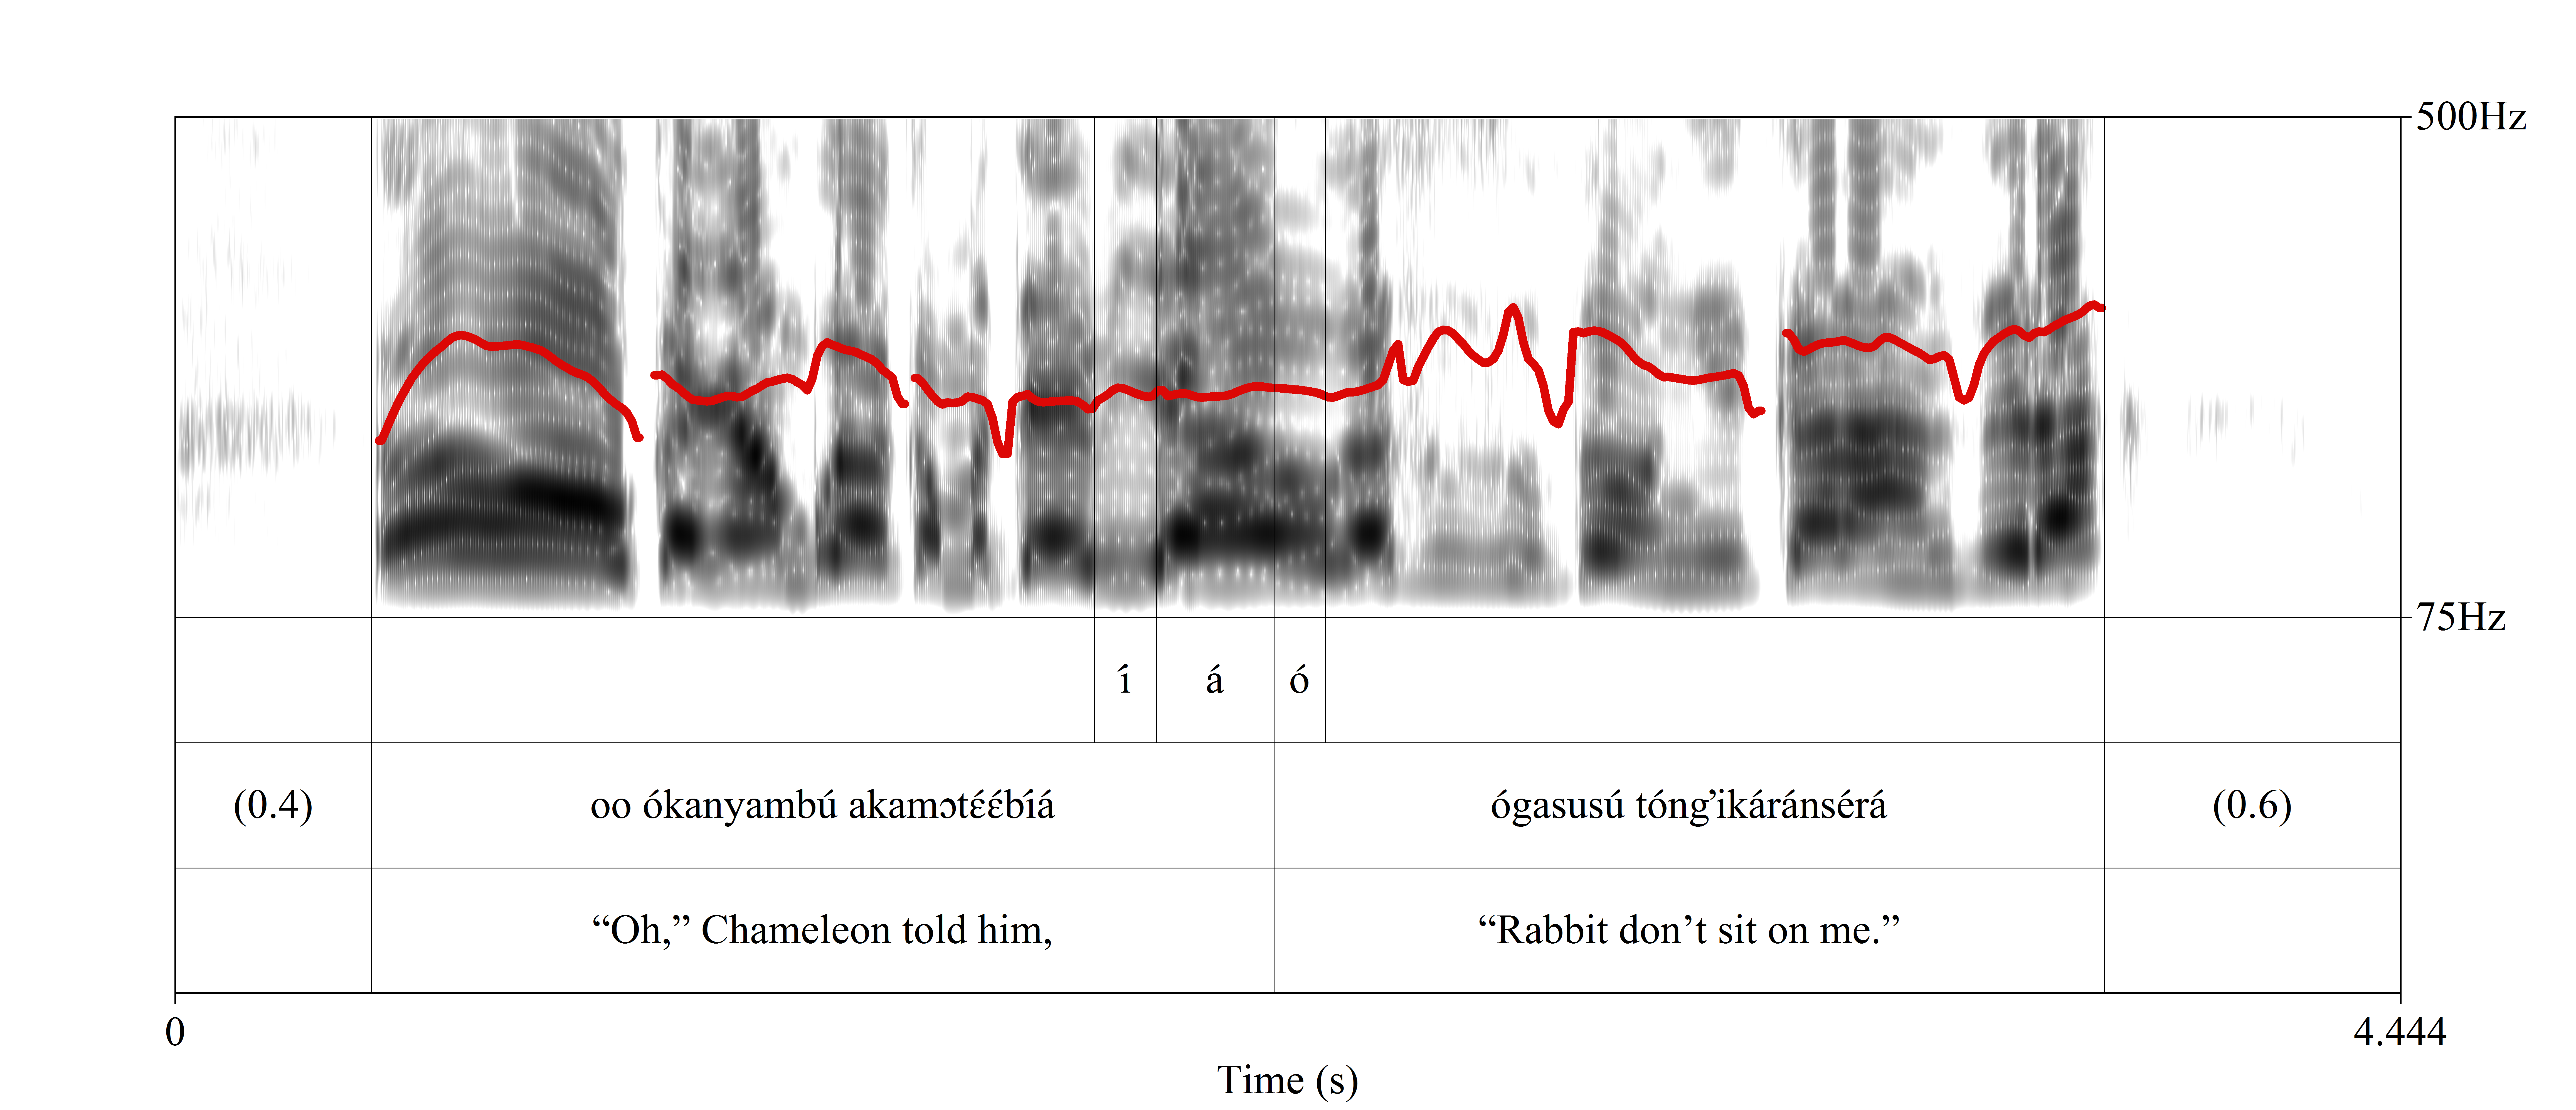 spectrograph showing lack of vowel elision at the transition into reported speech